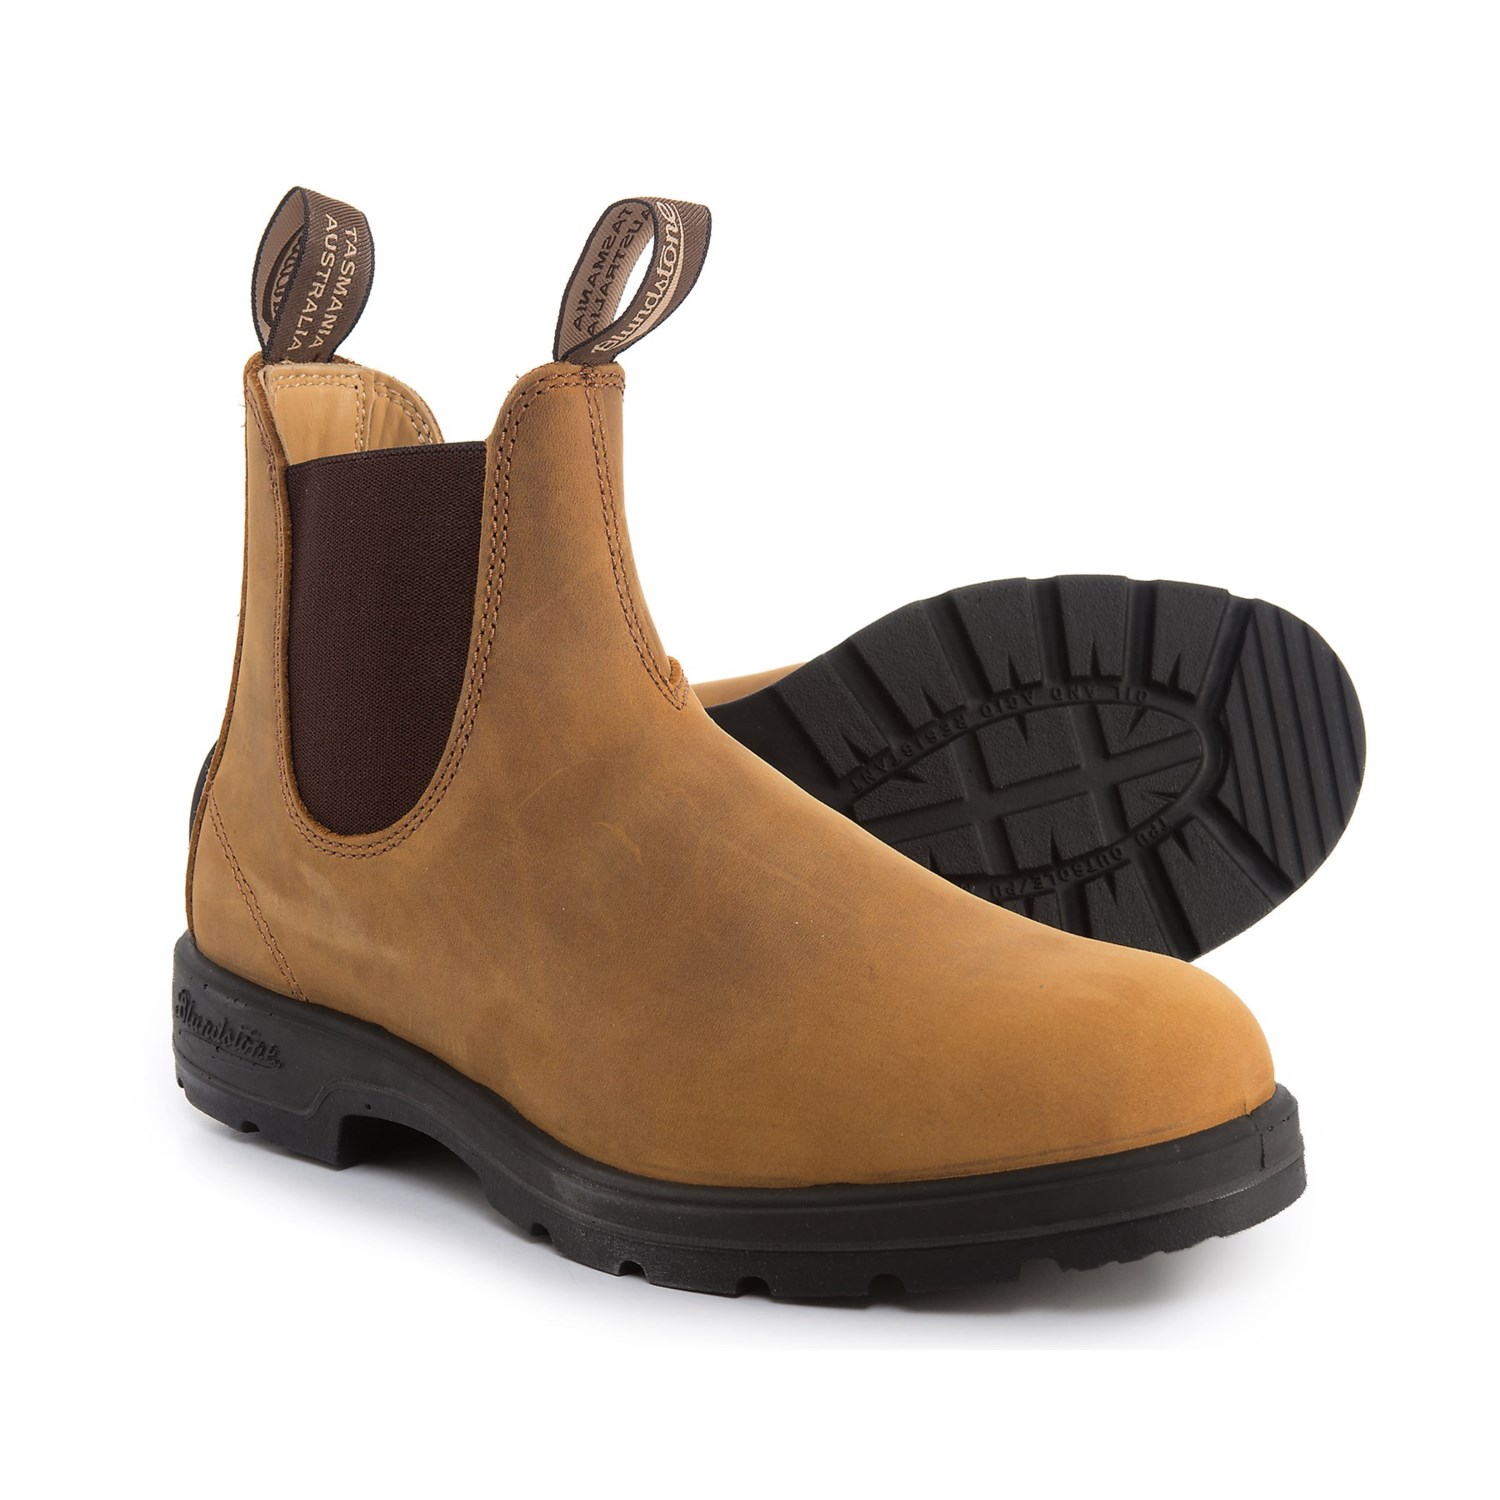 blundstone factory seconds cheap online